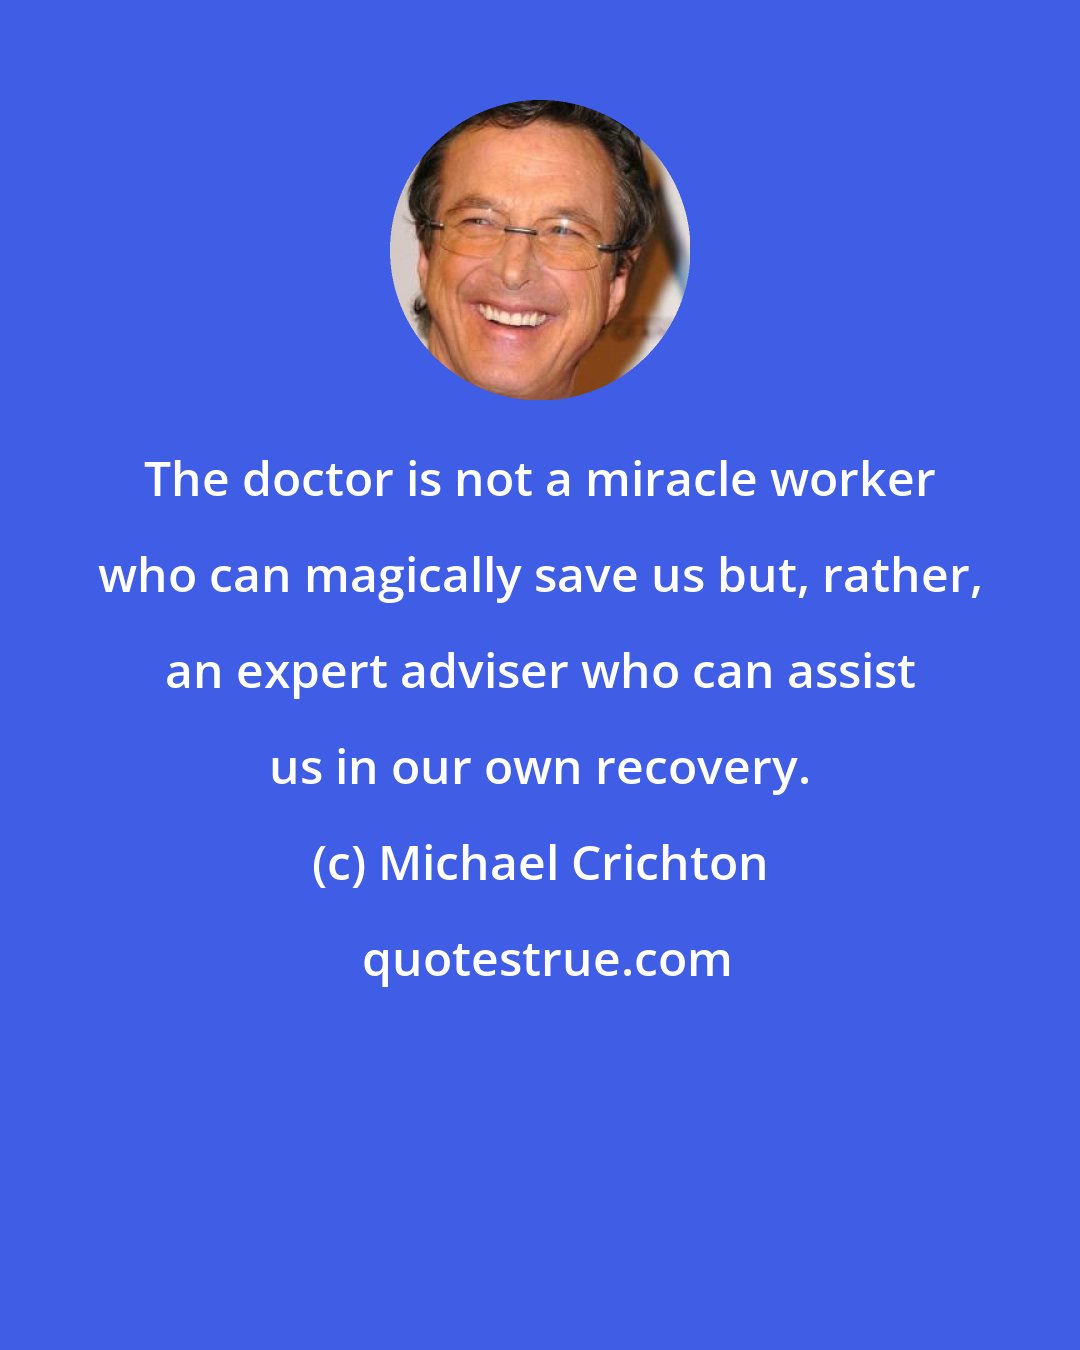 Michael Crichton: The doctor is not a miracle worker who can magically save us but, rather, an expert adviser who can assist us in our own recovery.